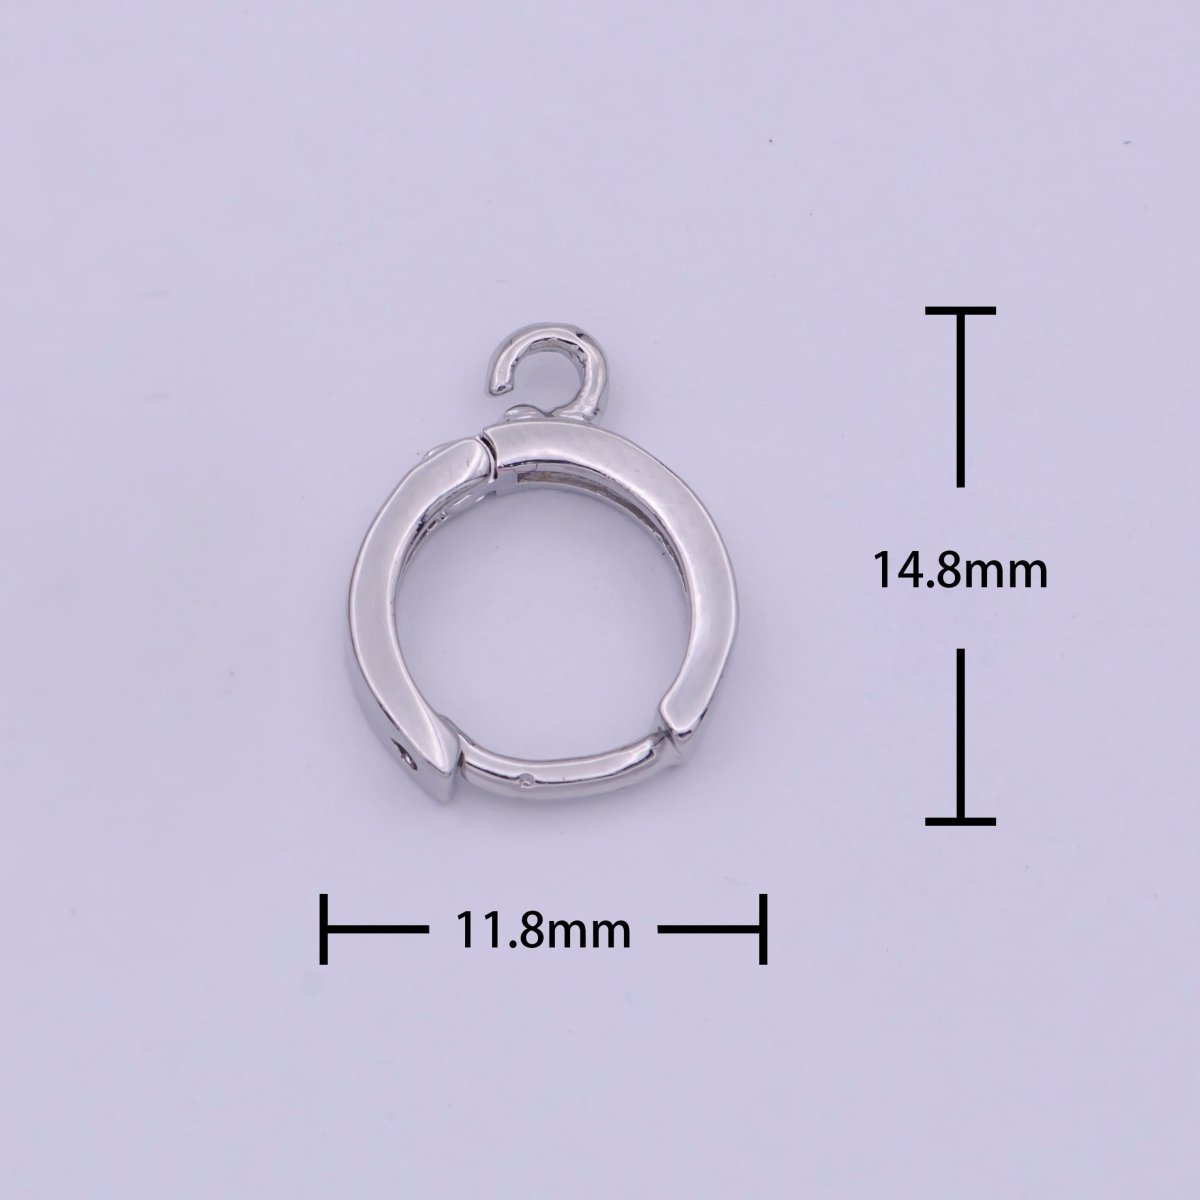 Simple one touch Lever back earring with open link for Jewelry making 12mm Silver Hoop Earring L-643 - DLUXCA